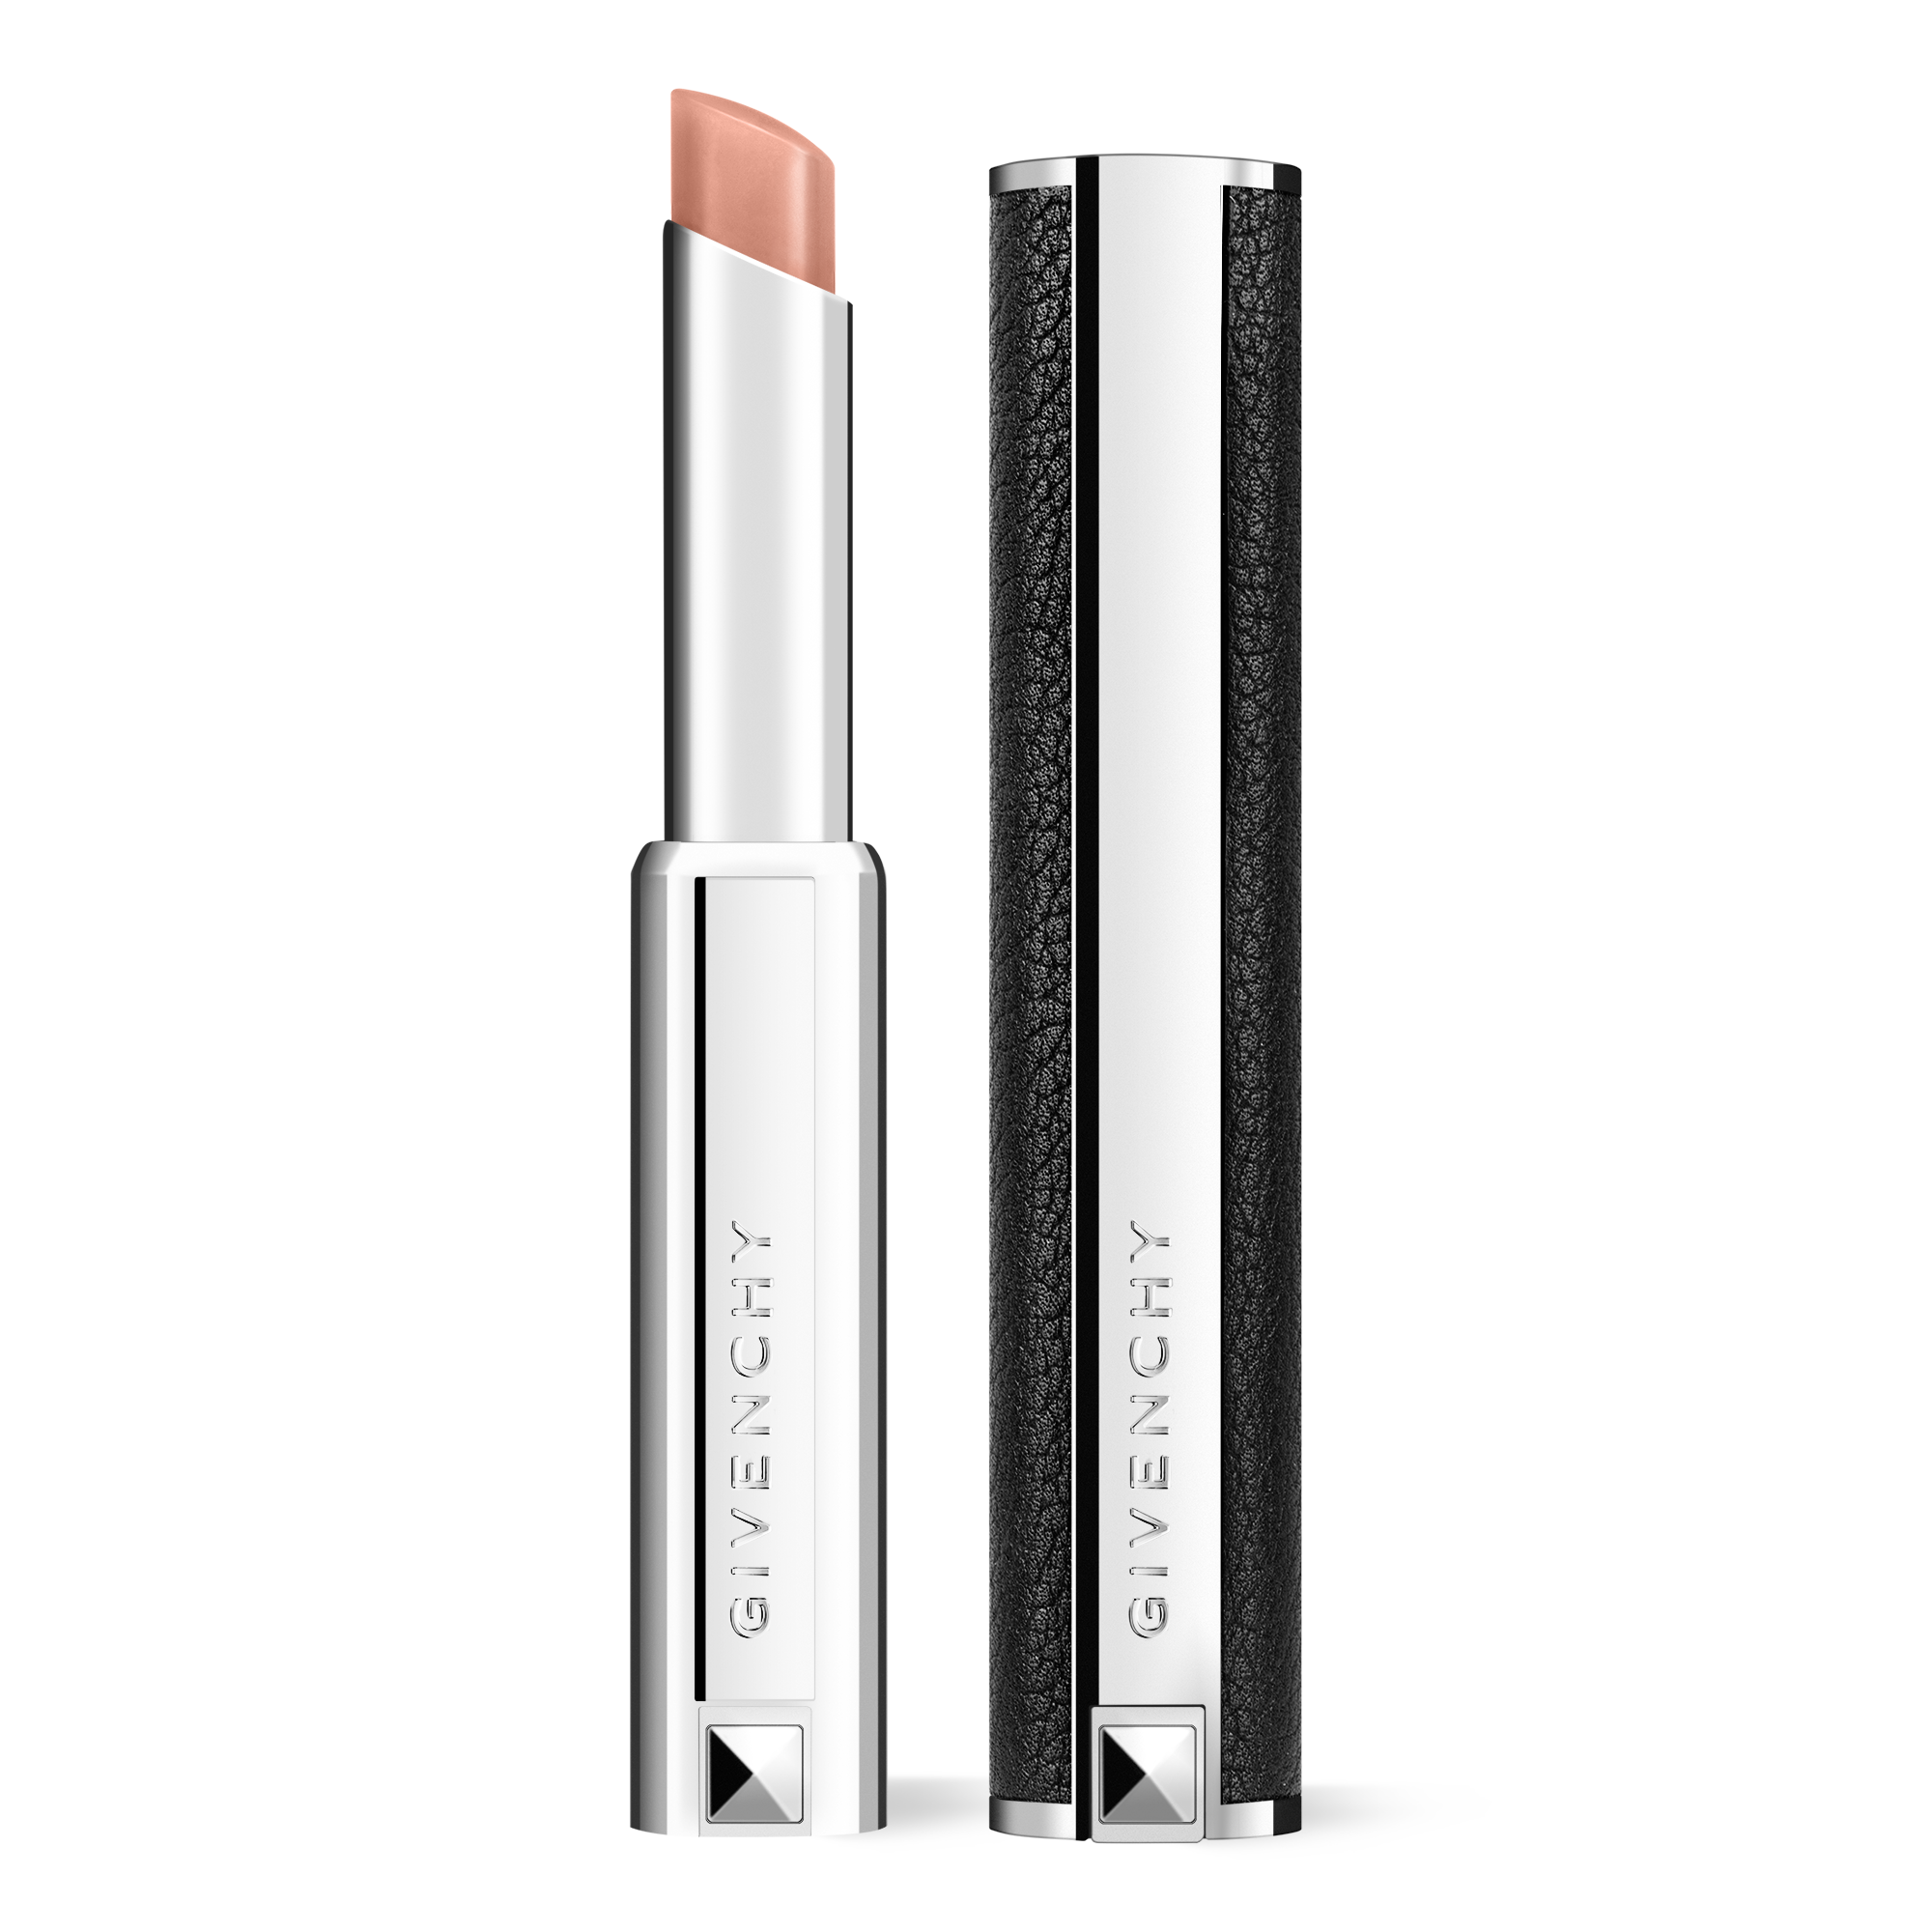 givenchy le rouge a porter 301